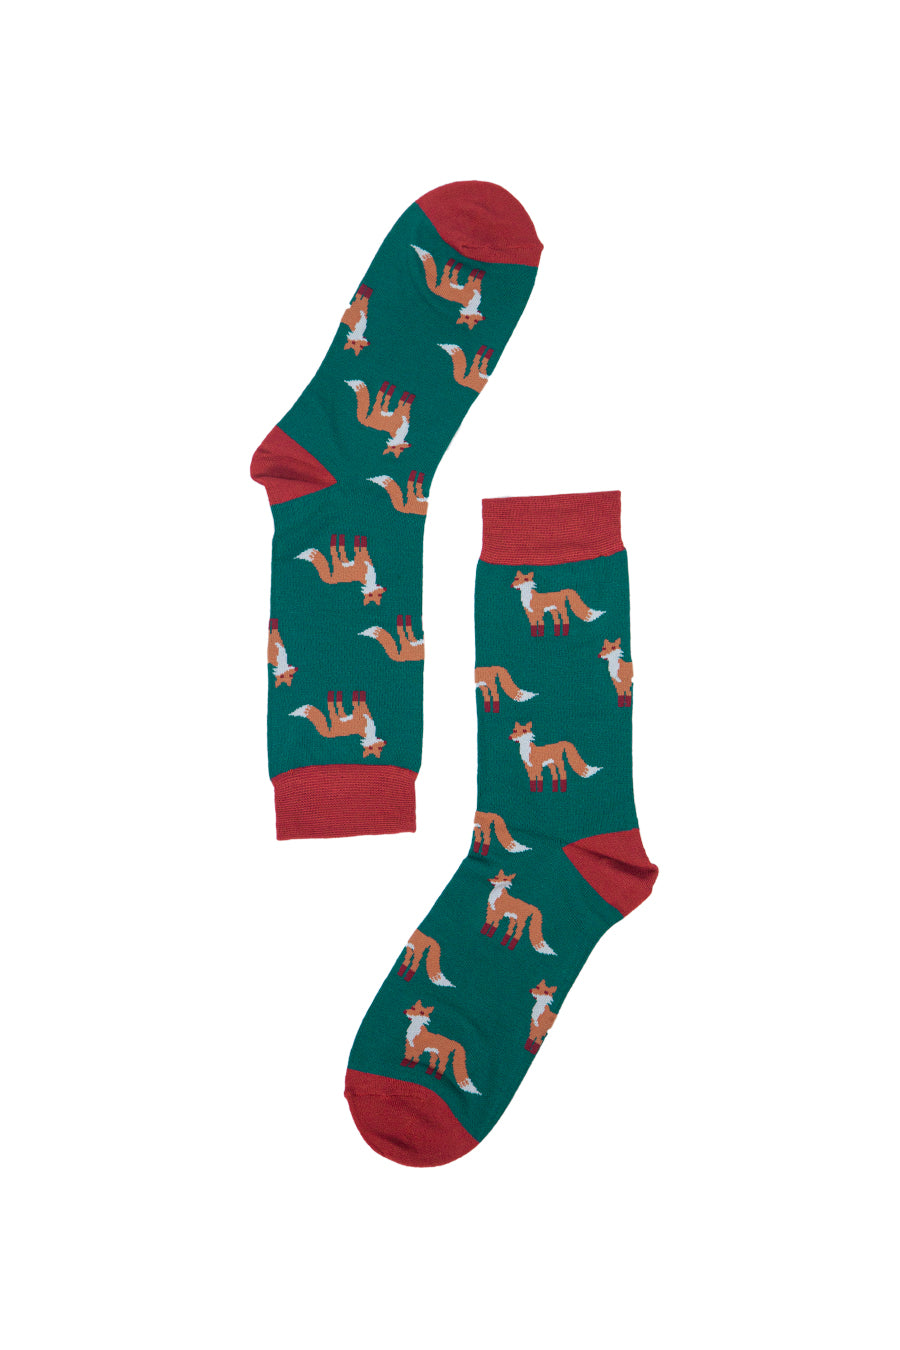 green and red fox socks, the foxes are wearing red socks